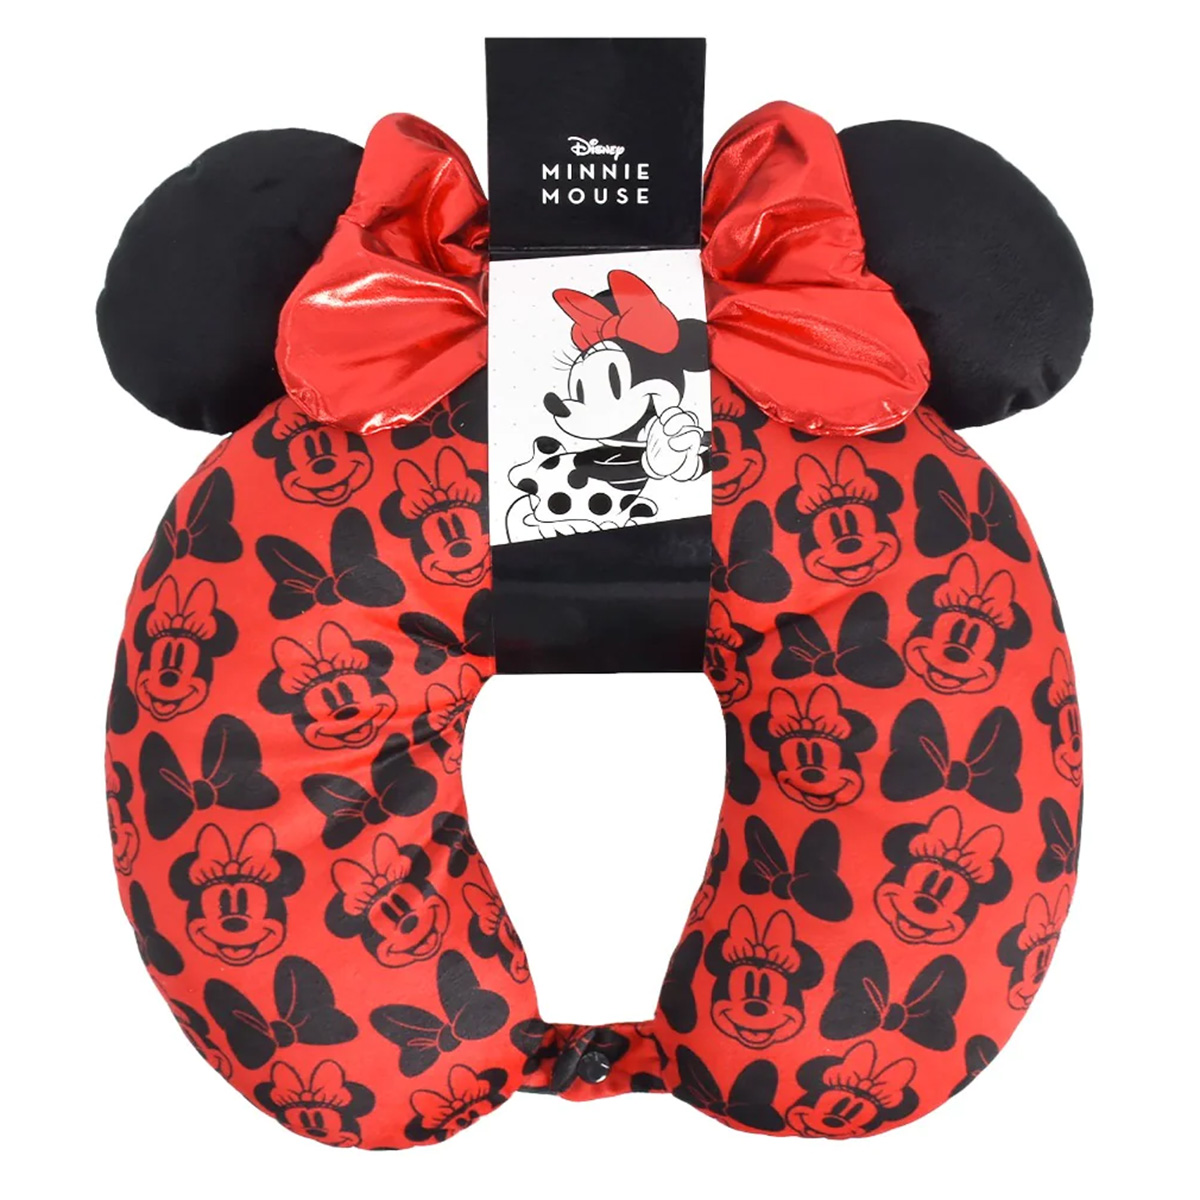 Minnie Mouse Neck Pillow - Red/Black